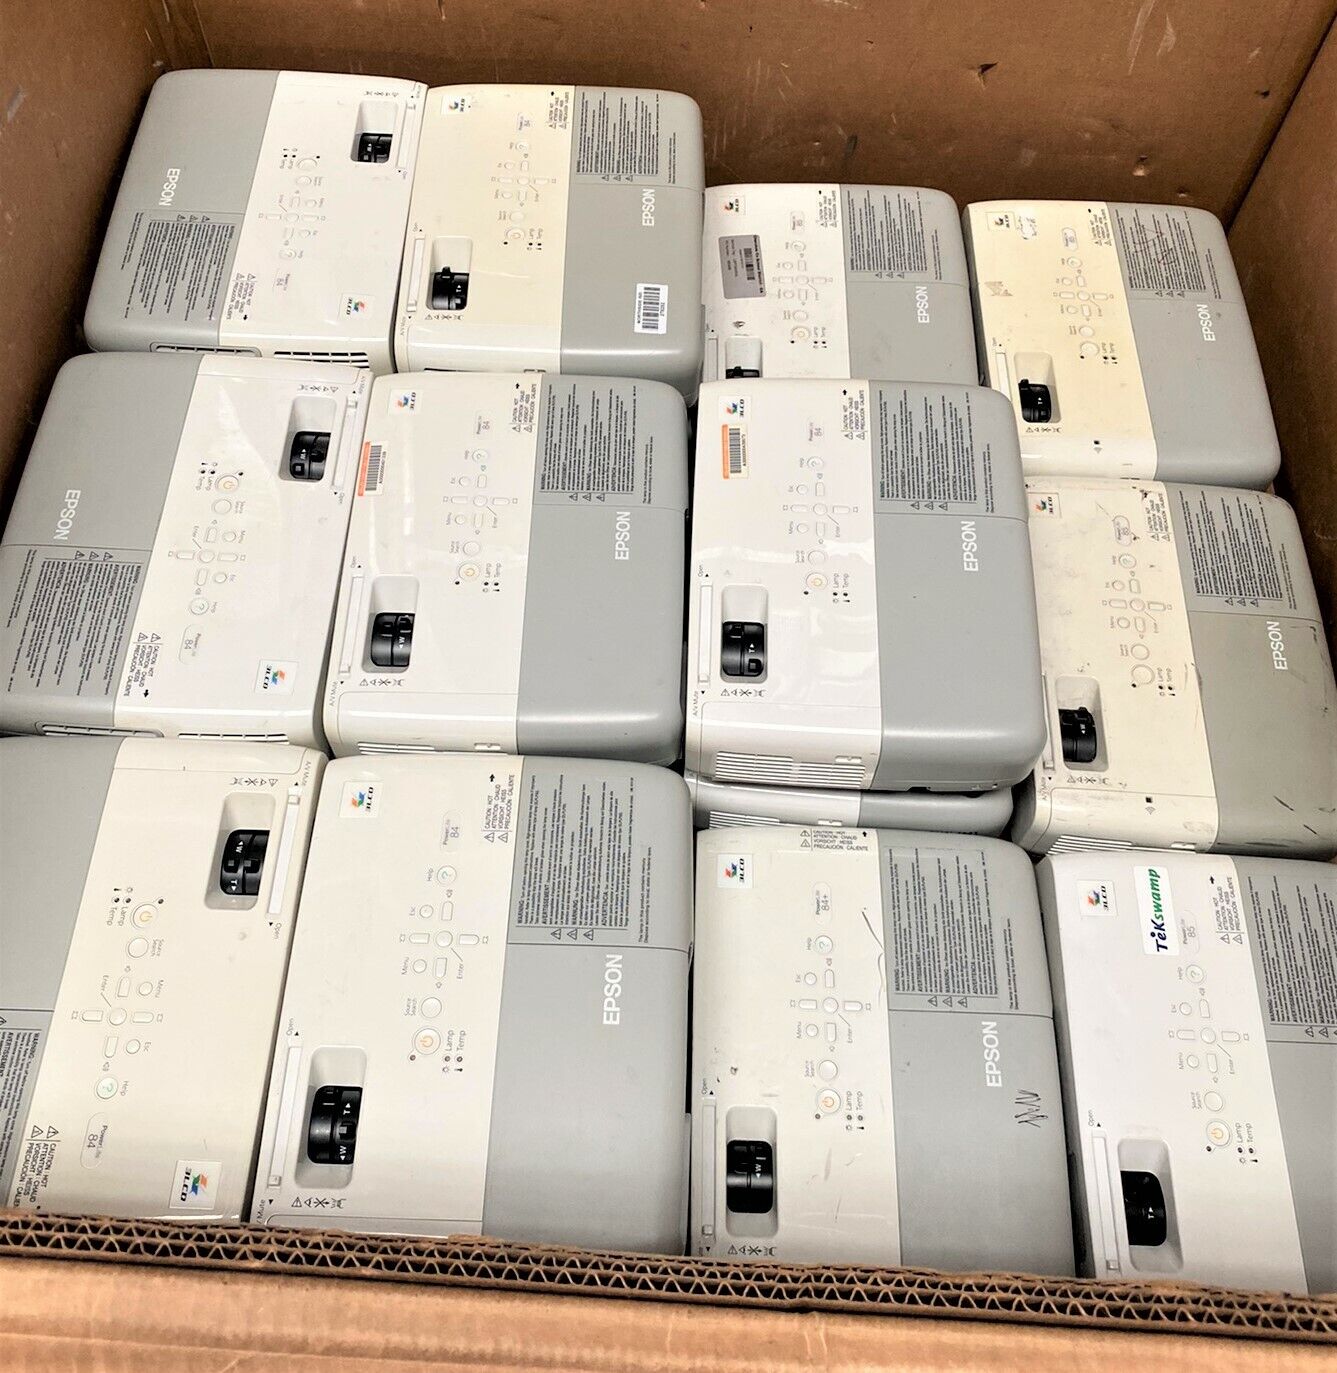 Lot of 100 - Epsons 84, 84+, 85, 85+ Projectors - NO Lamps - Working! Epson DOES NOT APPLY, V11H353020